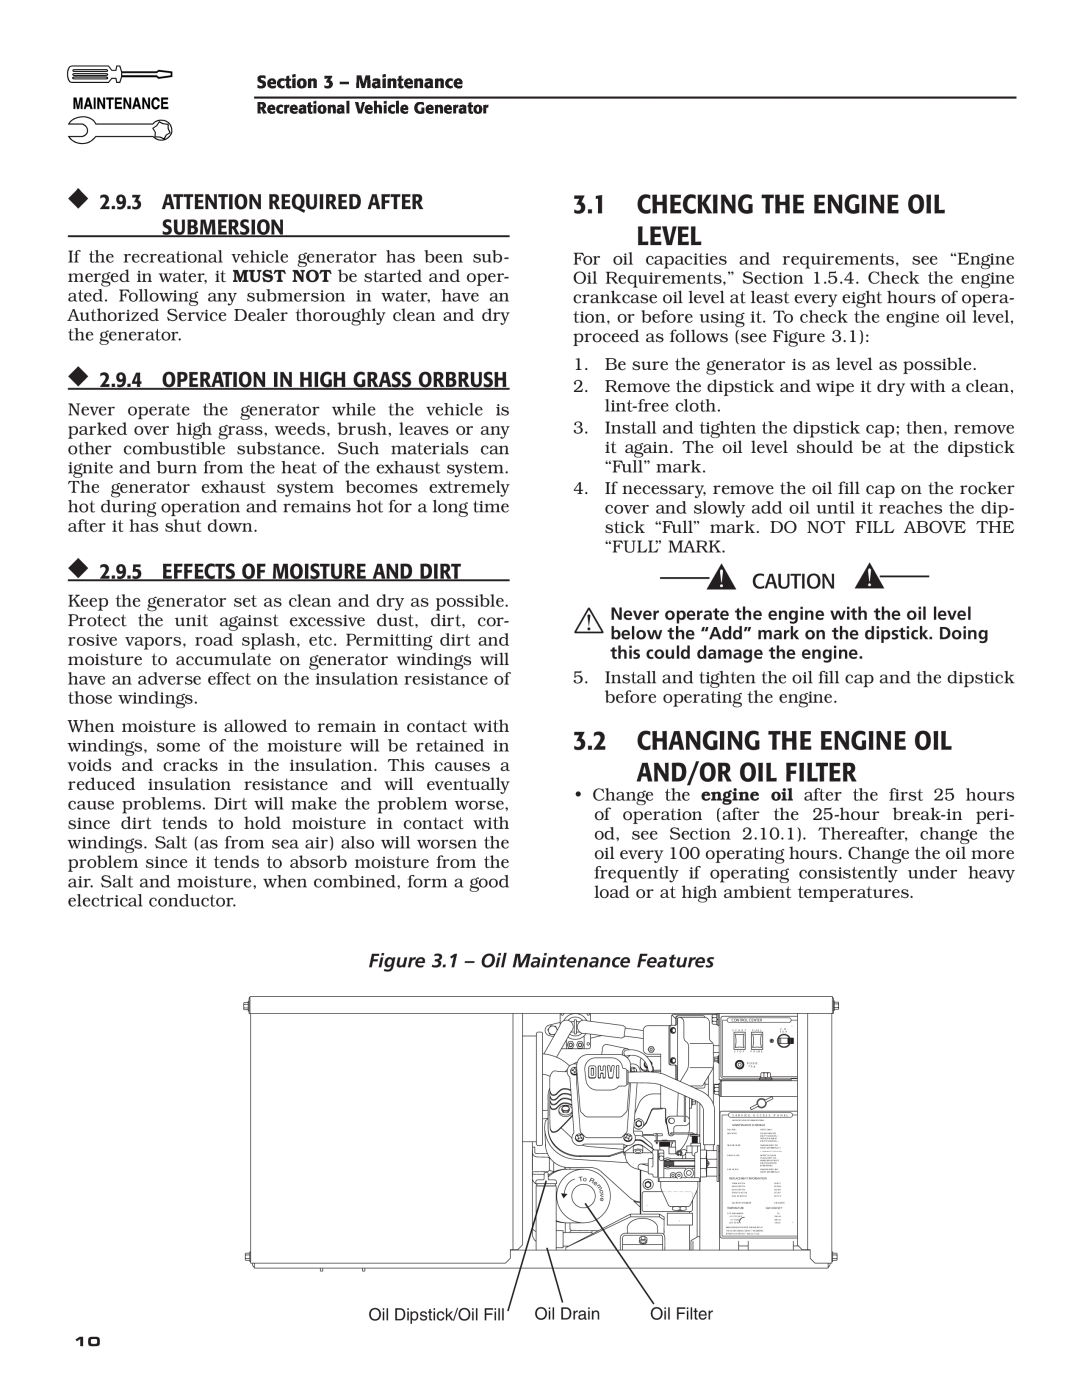 Guardian Technologies 004701-0 owner manual 3.1CHECKING the ENGINE OIL LEVEL, 3.2CHANGing the ENGINE OIL and/or Oil Filter 